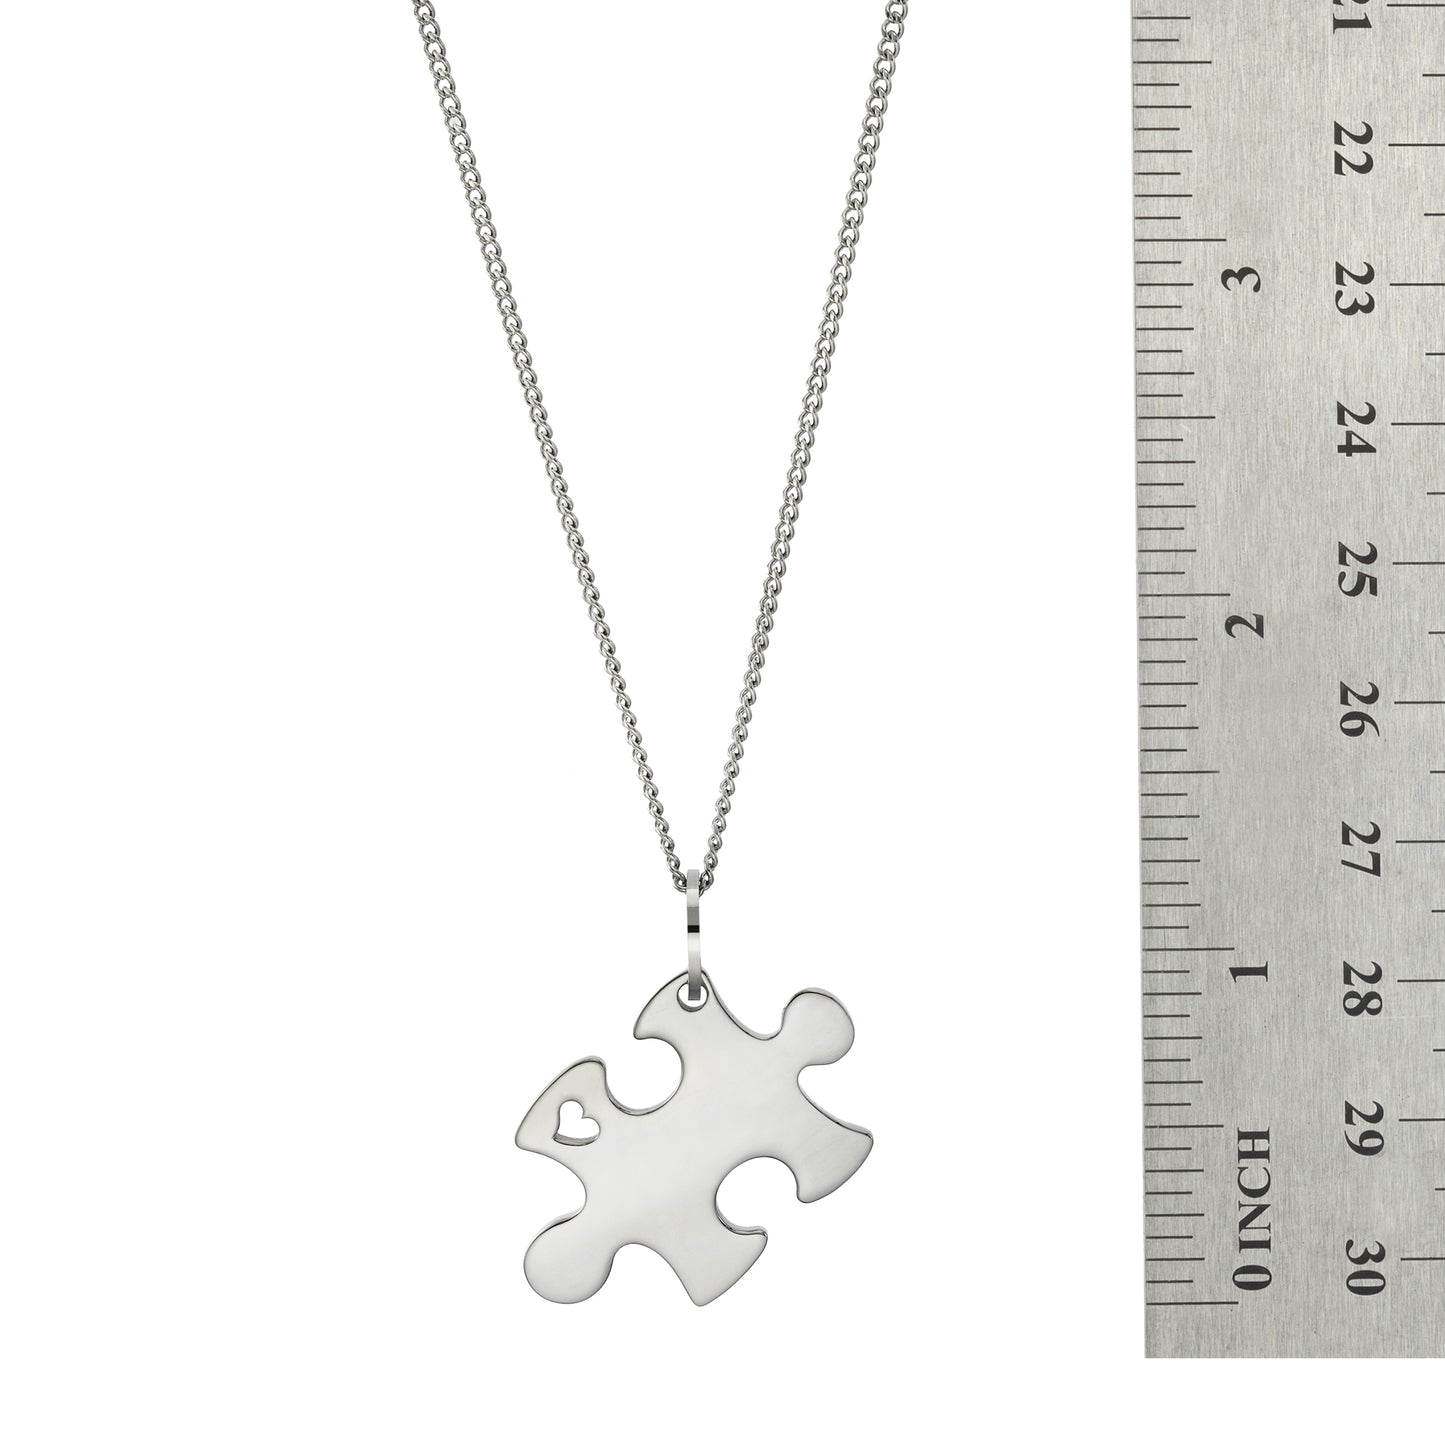 Autism Awareness Puzzle Piece Pendant Necklace - Support Jewelry Gift